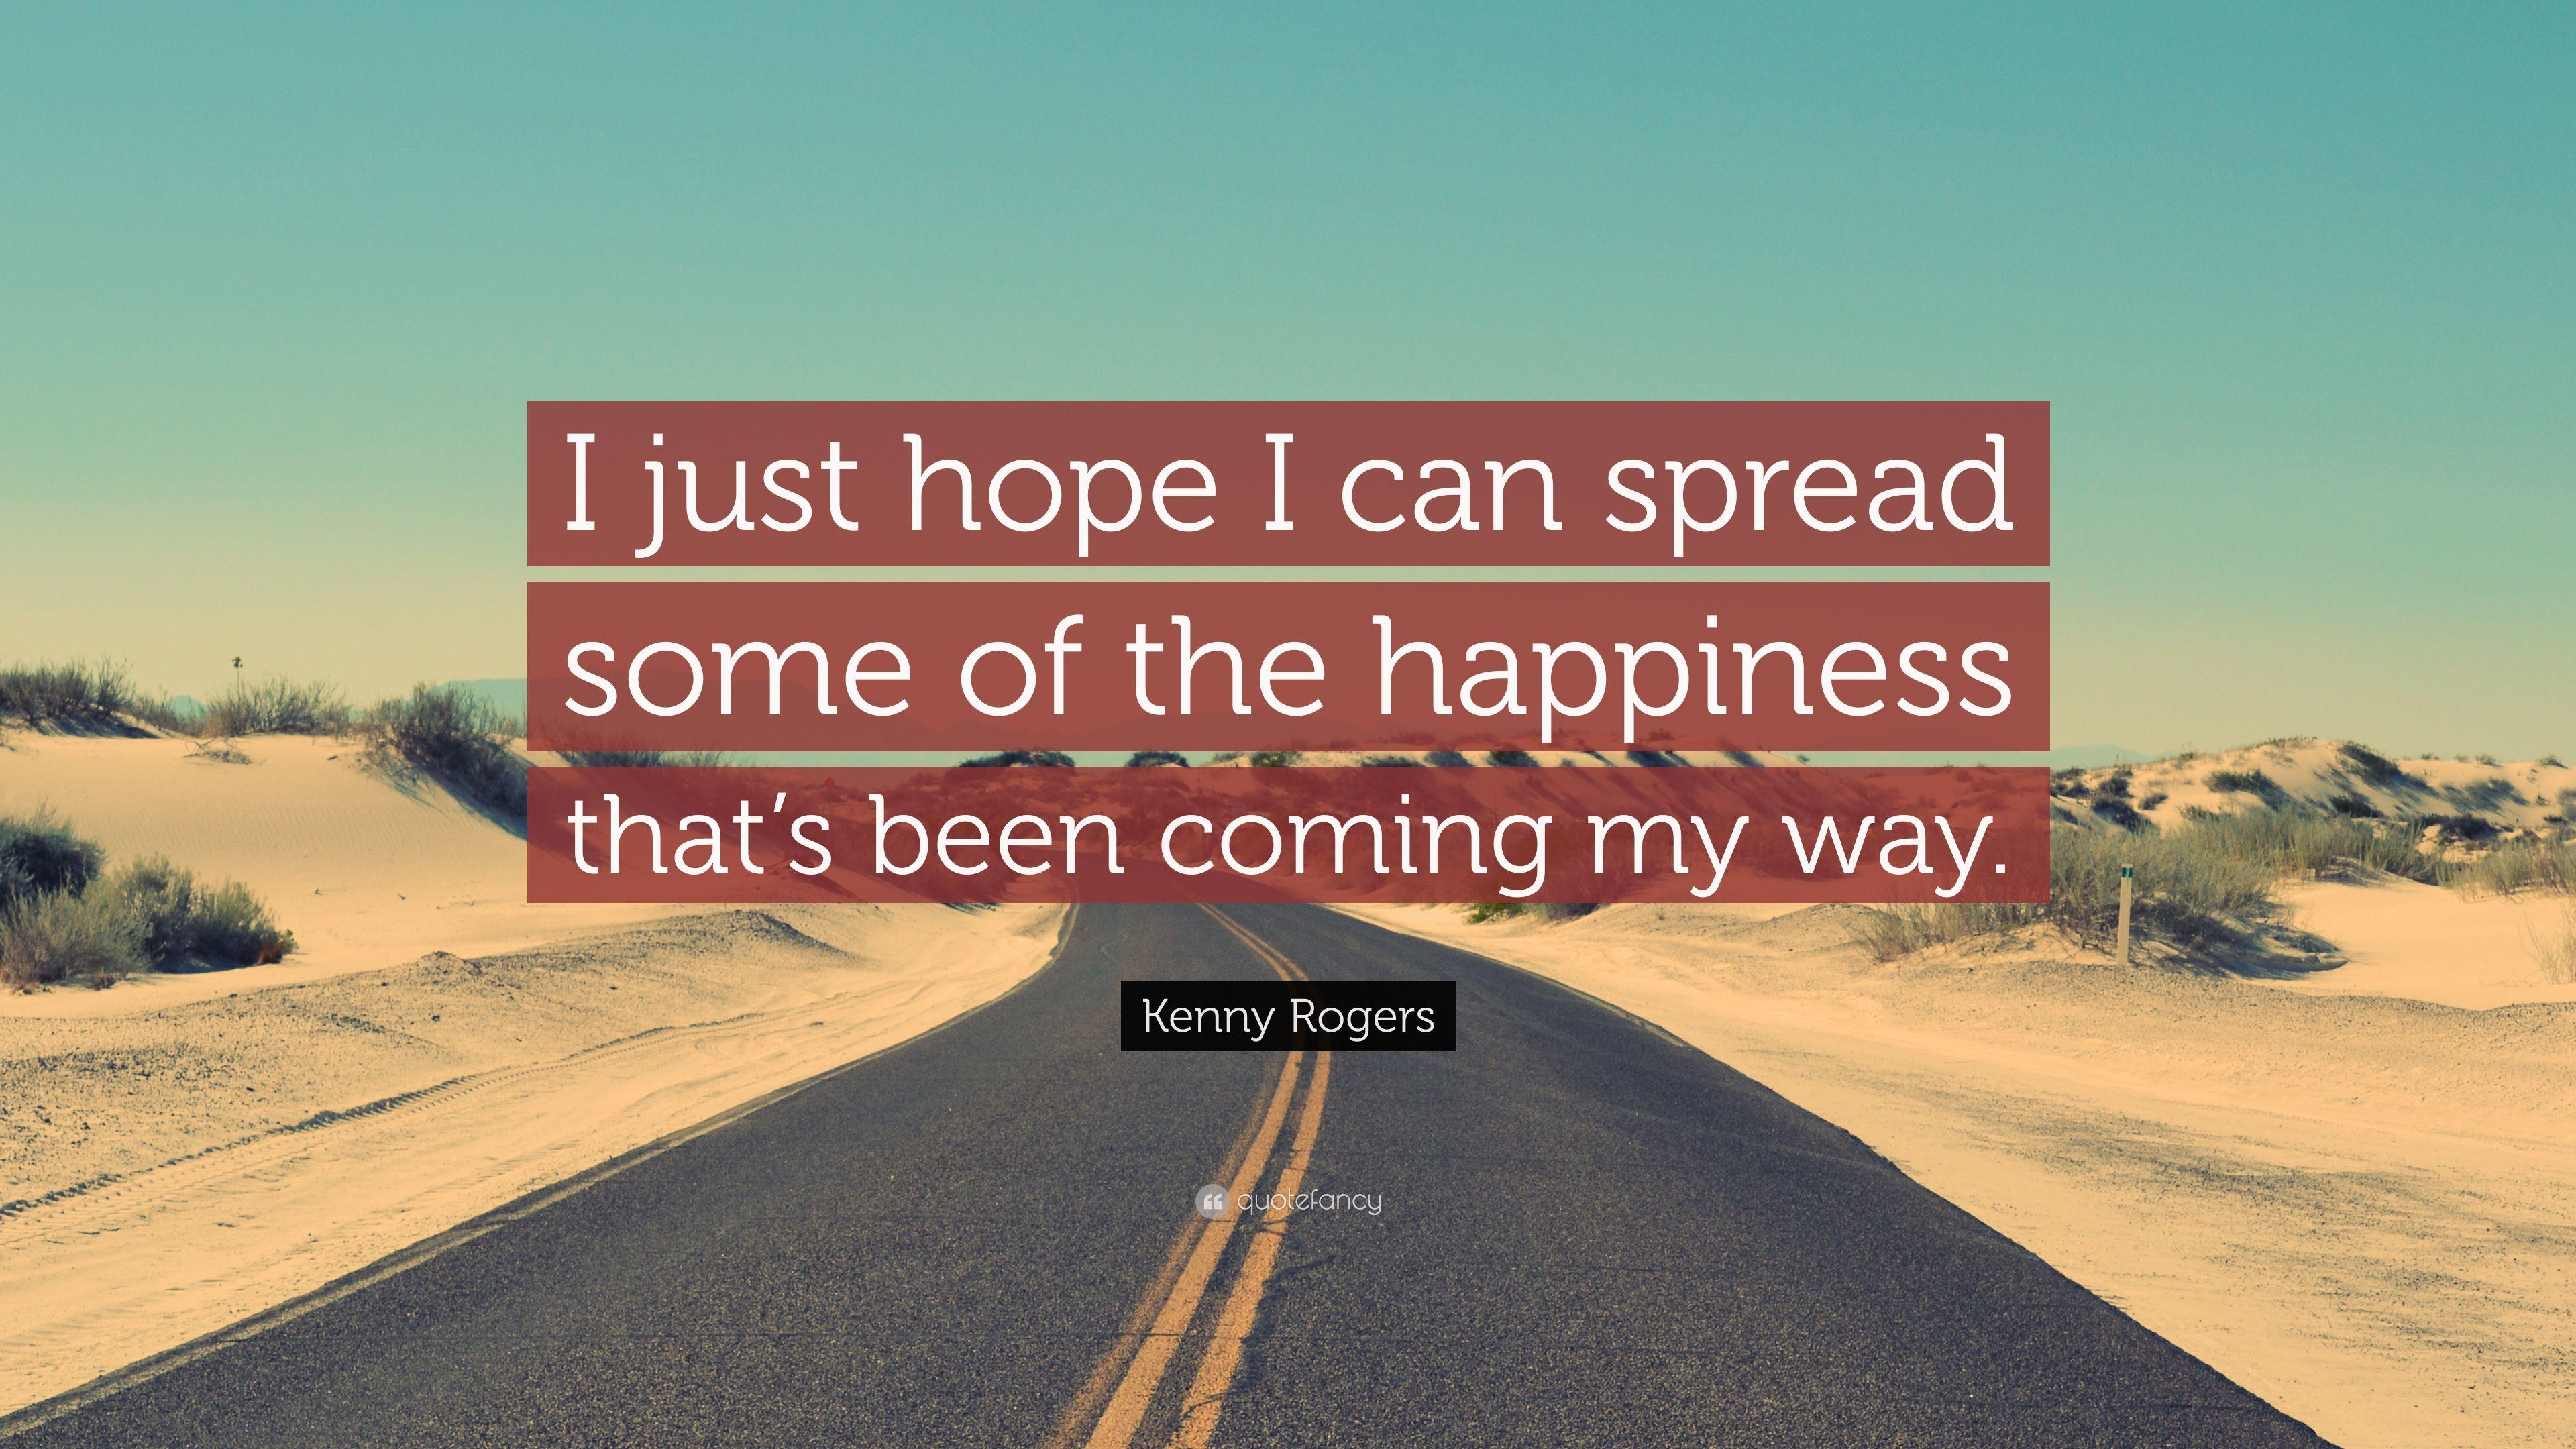 Kenny Rogers Quote: “I just hope I can spread some